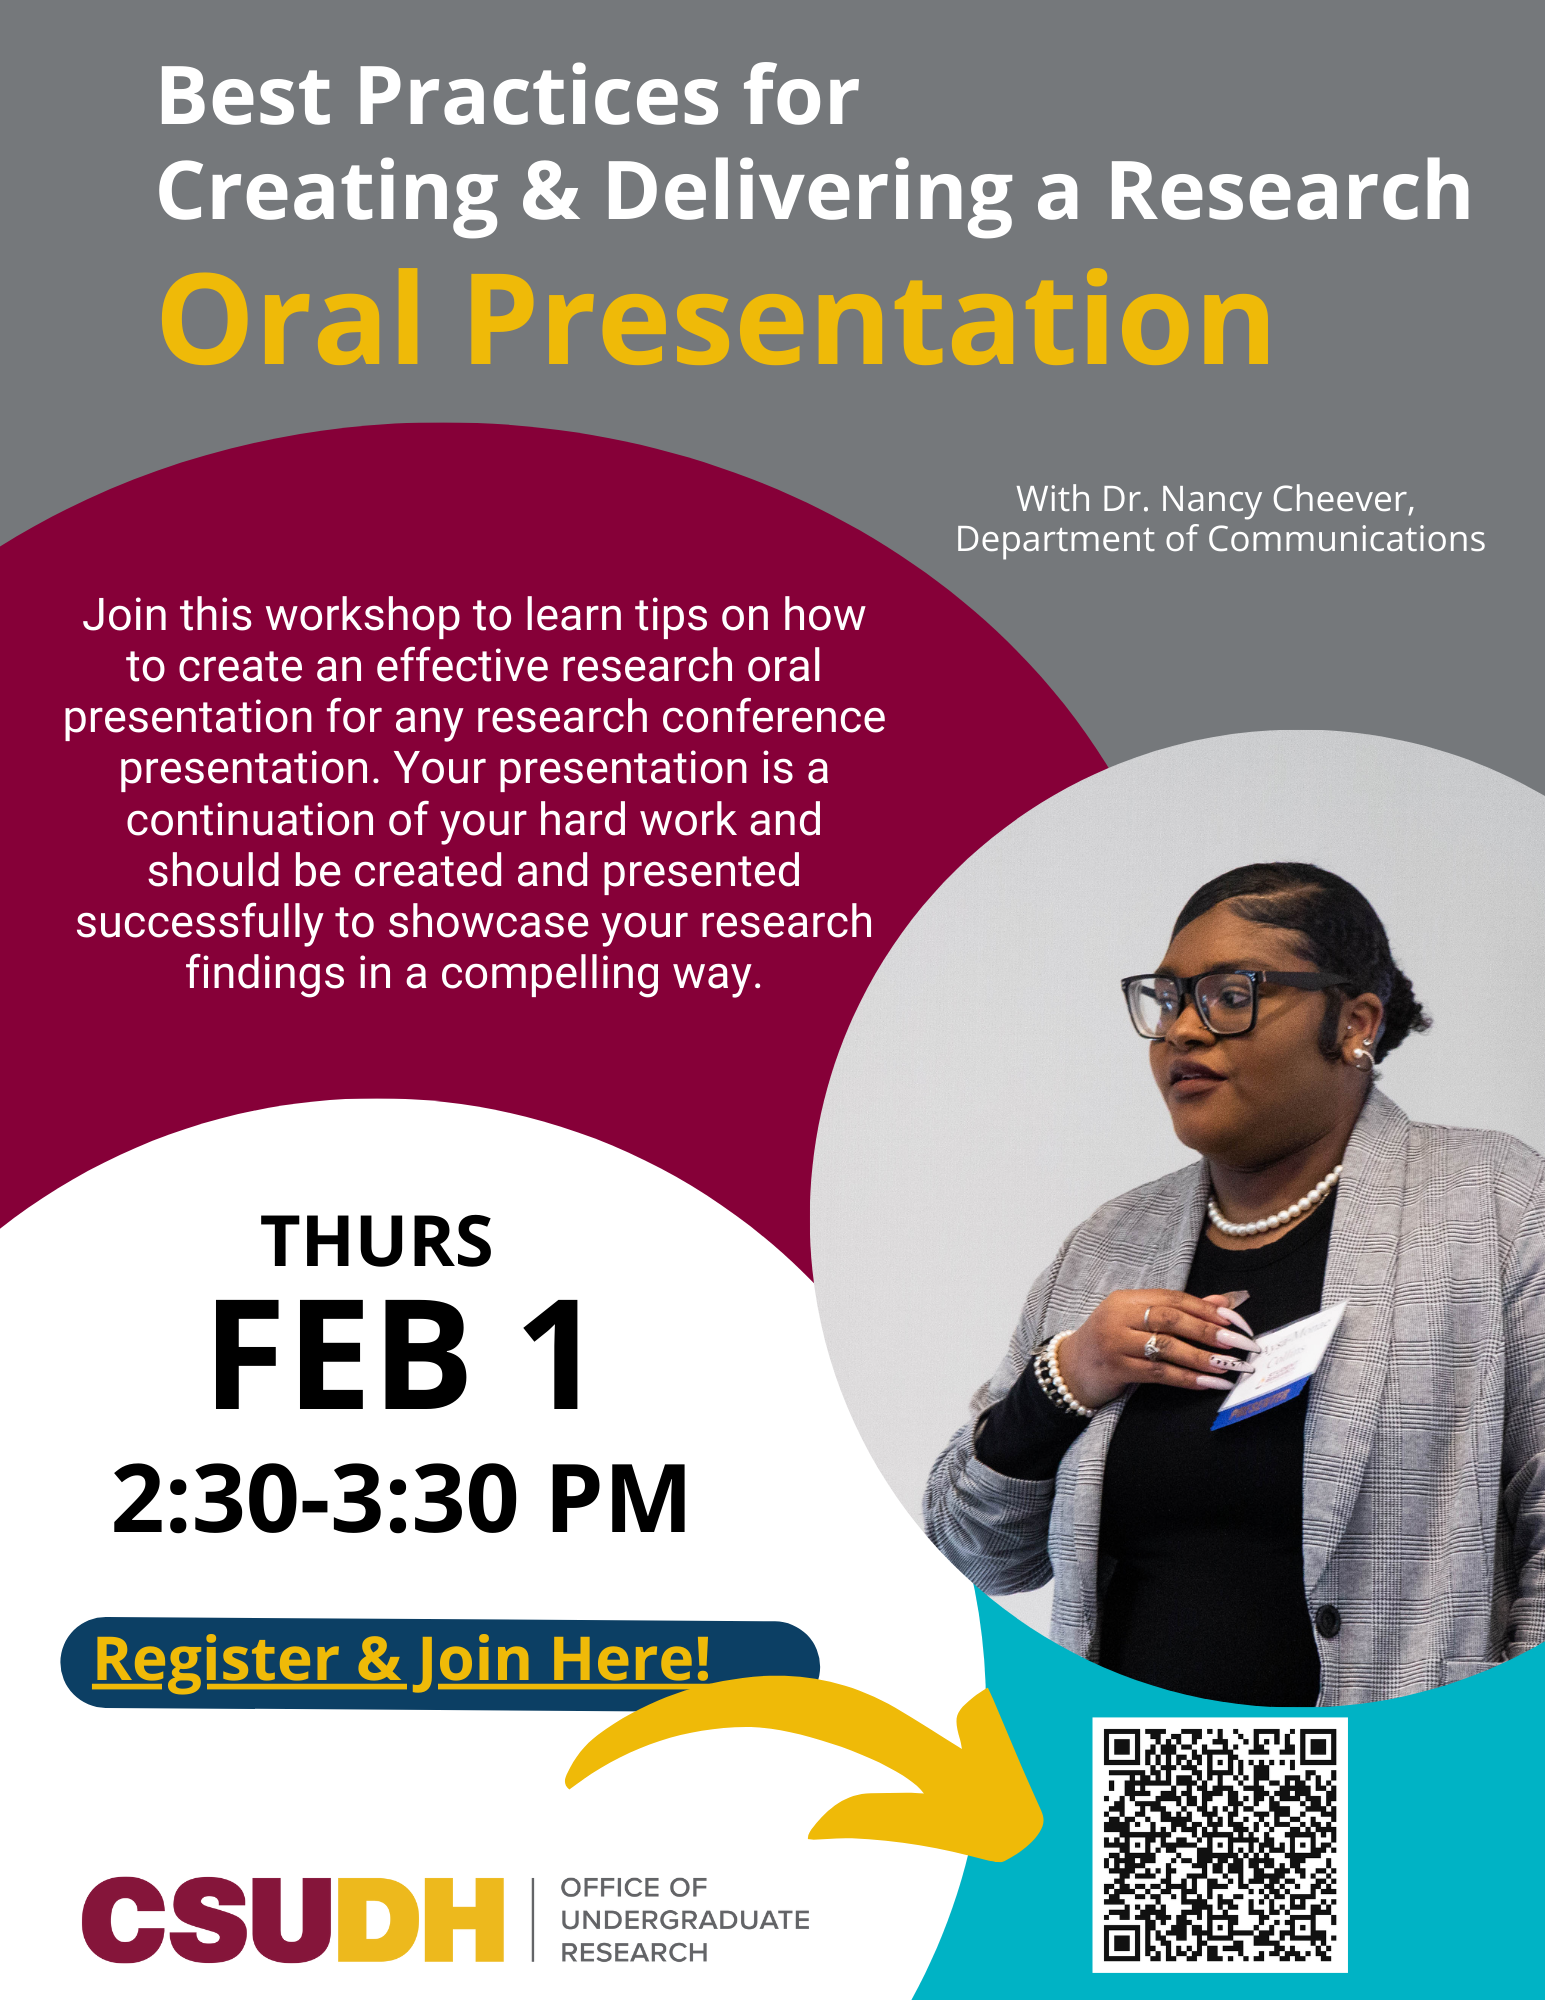 Best Practices for Creating & Delivering a Research Oral Presentation